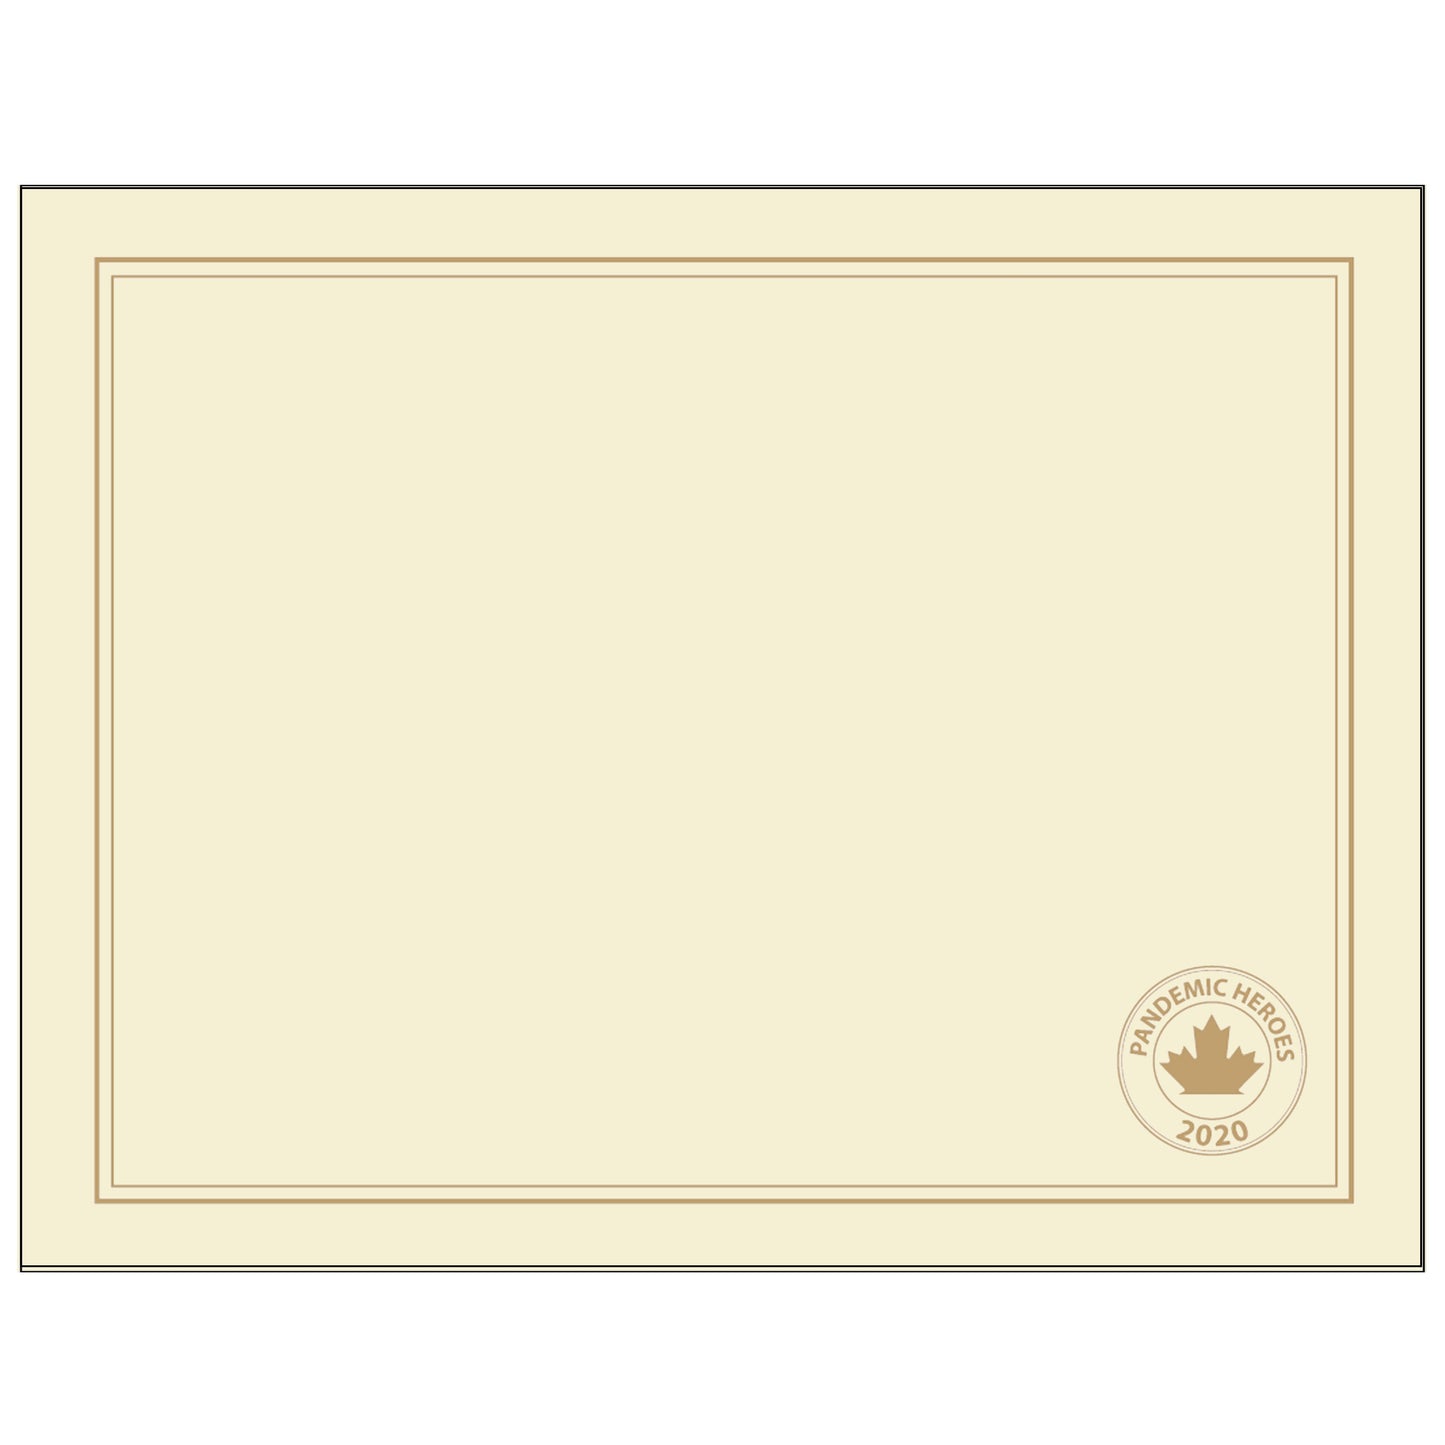 St. James® Premium Weight "Pandemic Heroes" Certificates, Gold Foil, Ivory, 65 lb, 8.5 x 11", Pack of 25